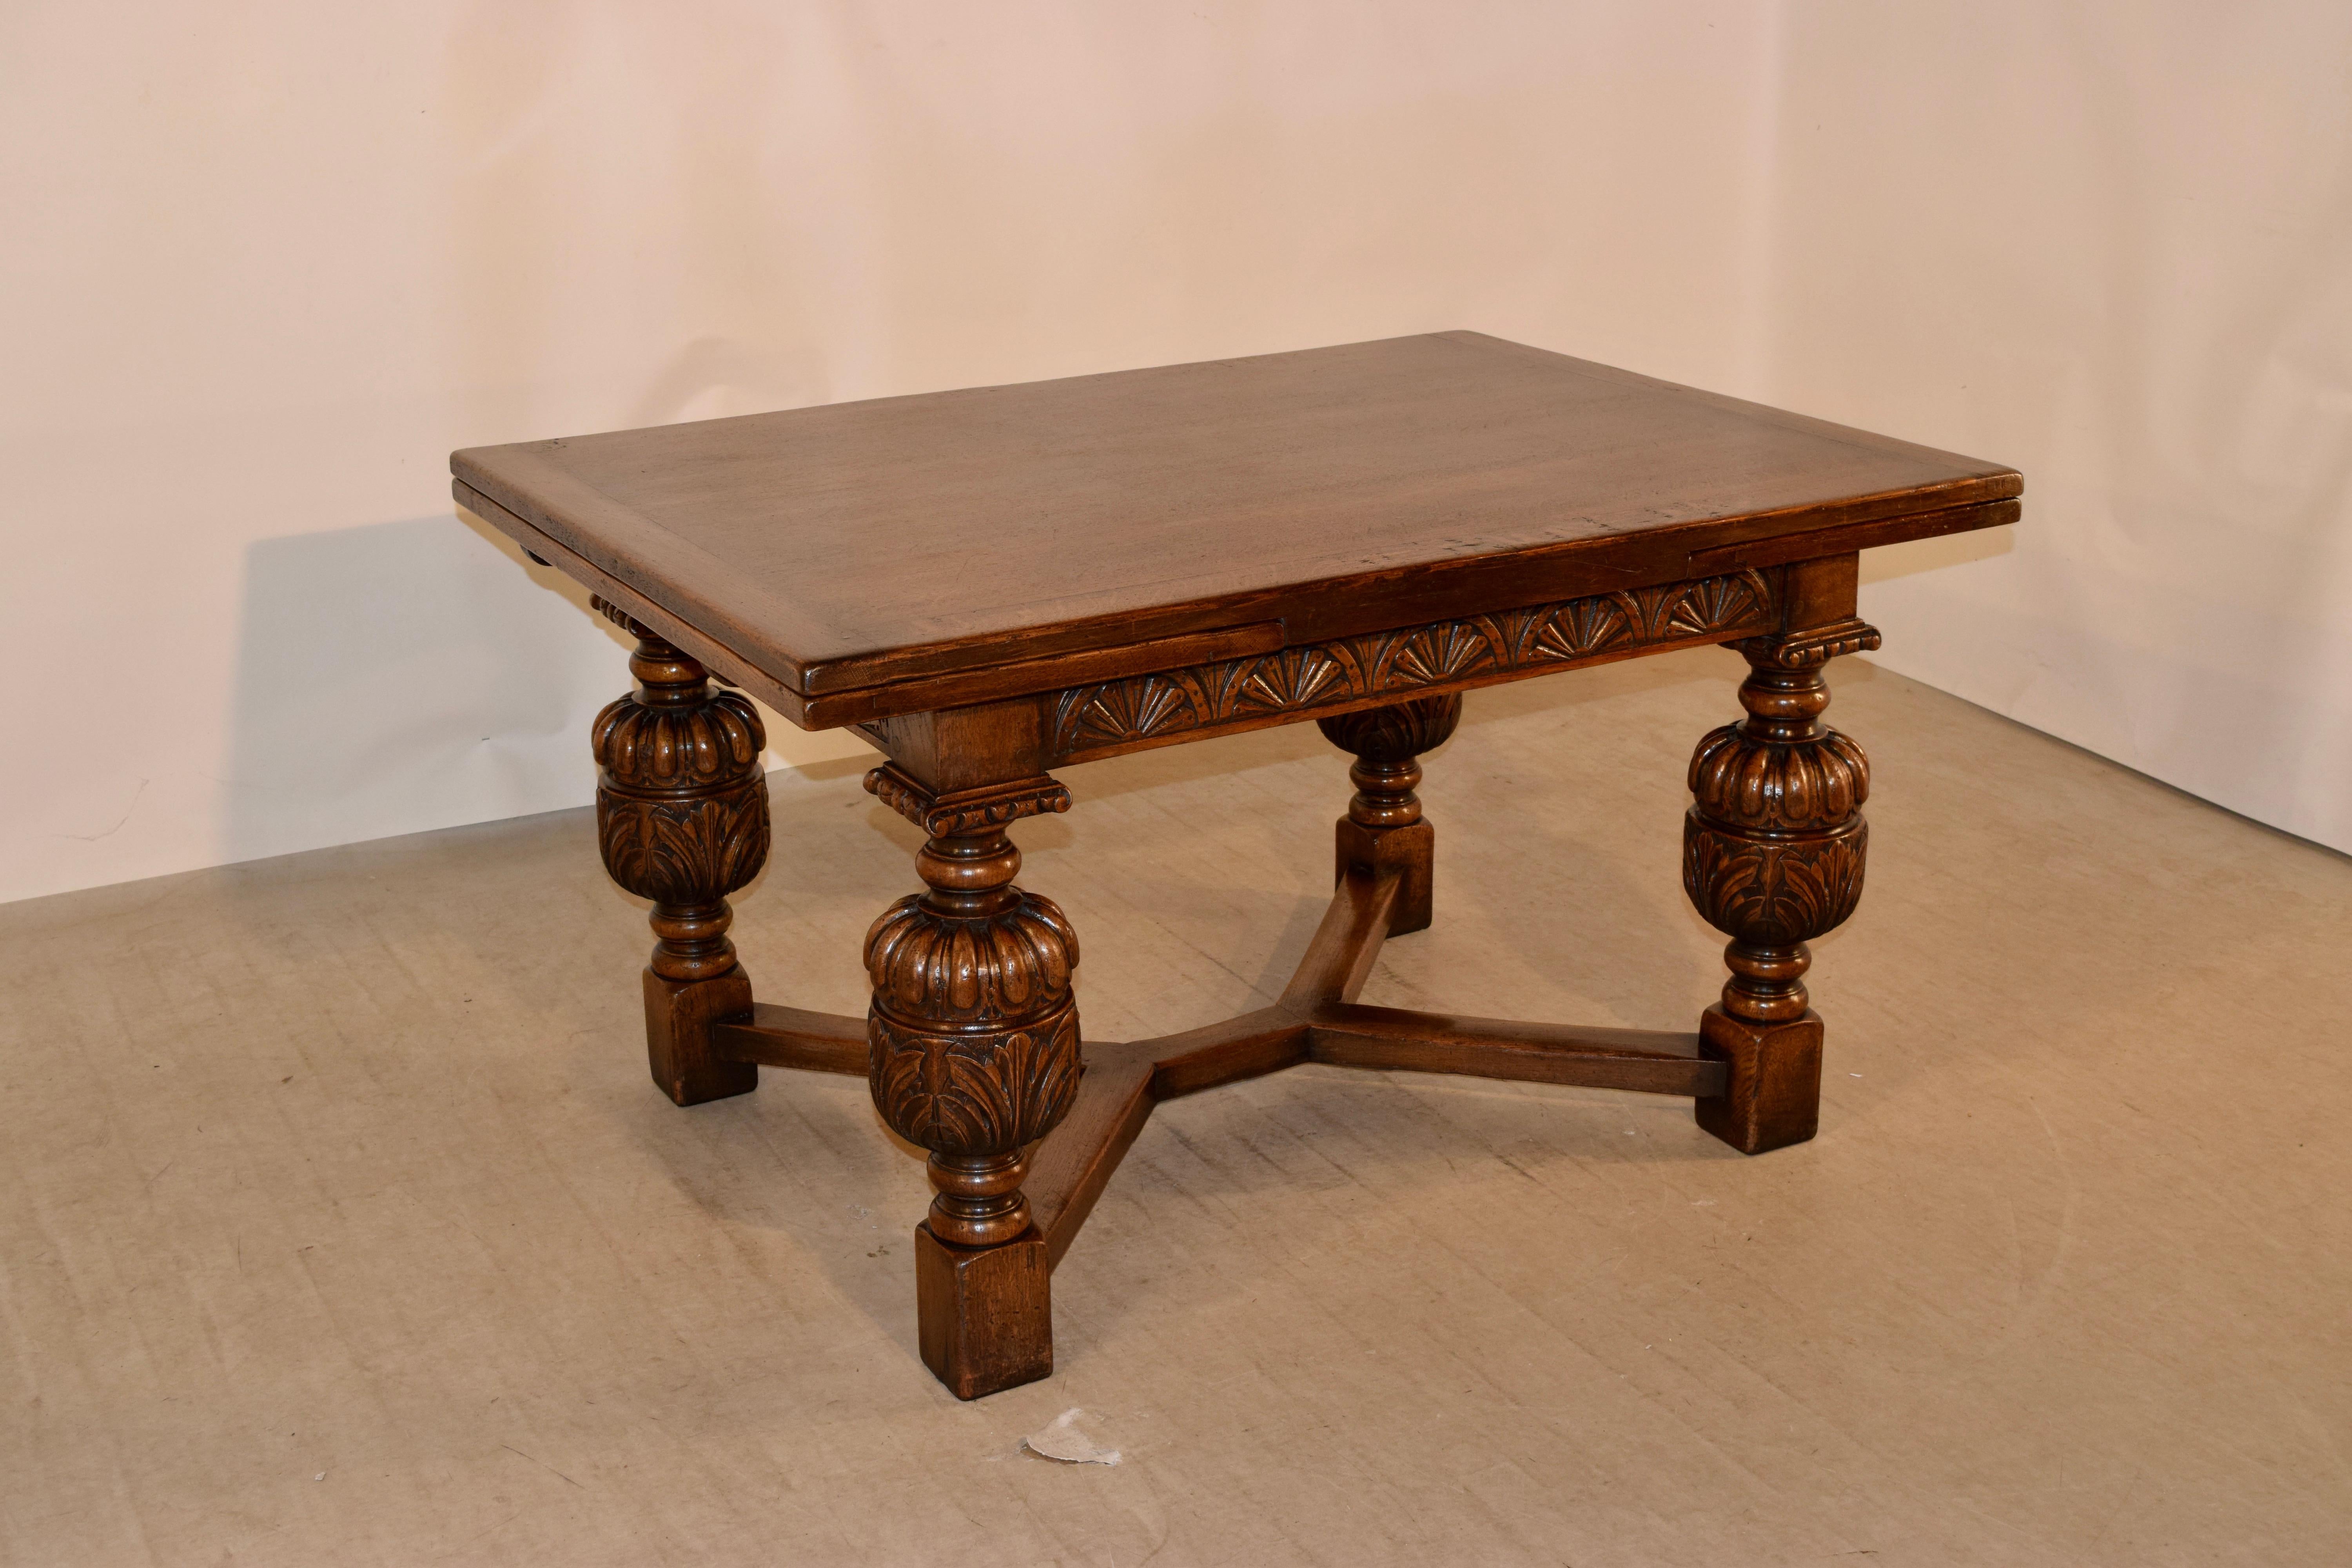 Late 19th century oak table by the very well-known Titchmarsh and Goodwin Company in Ipswich. The top is banded and has two draw leaves, which measure 89.38 inches when open. The apron is wonderfully hand carved decorated, and the table is supported